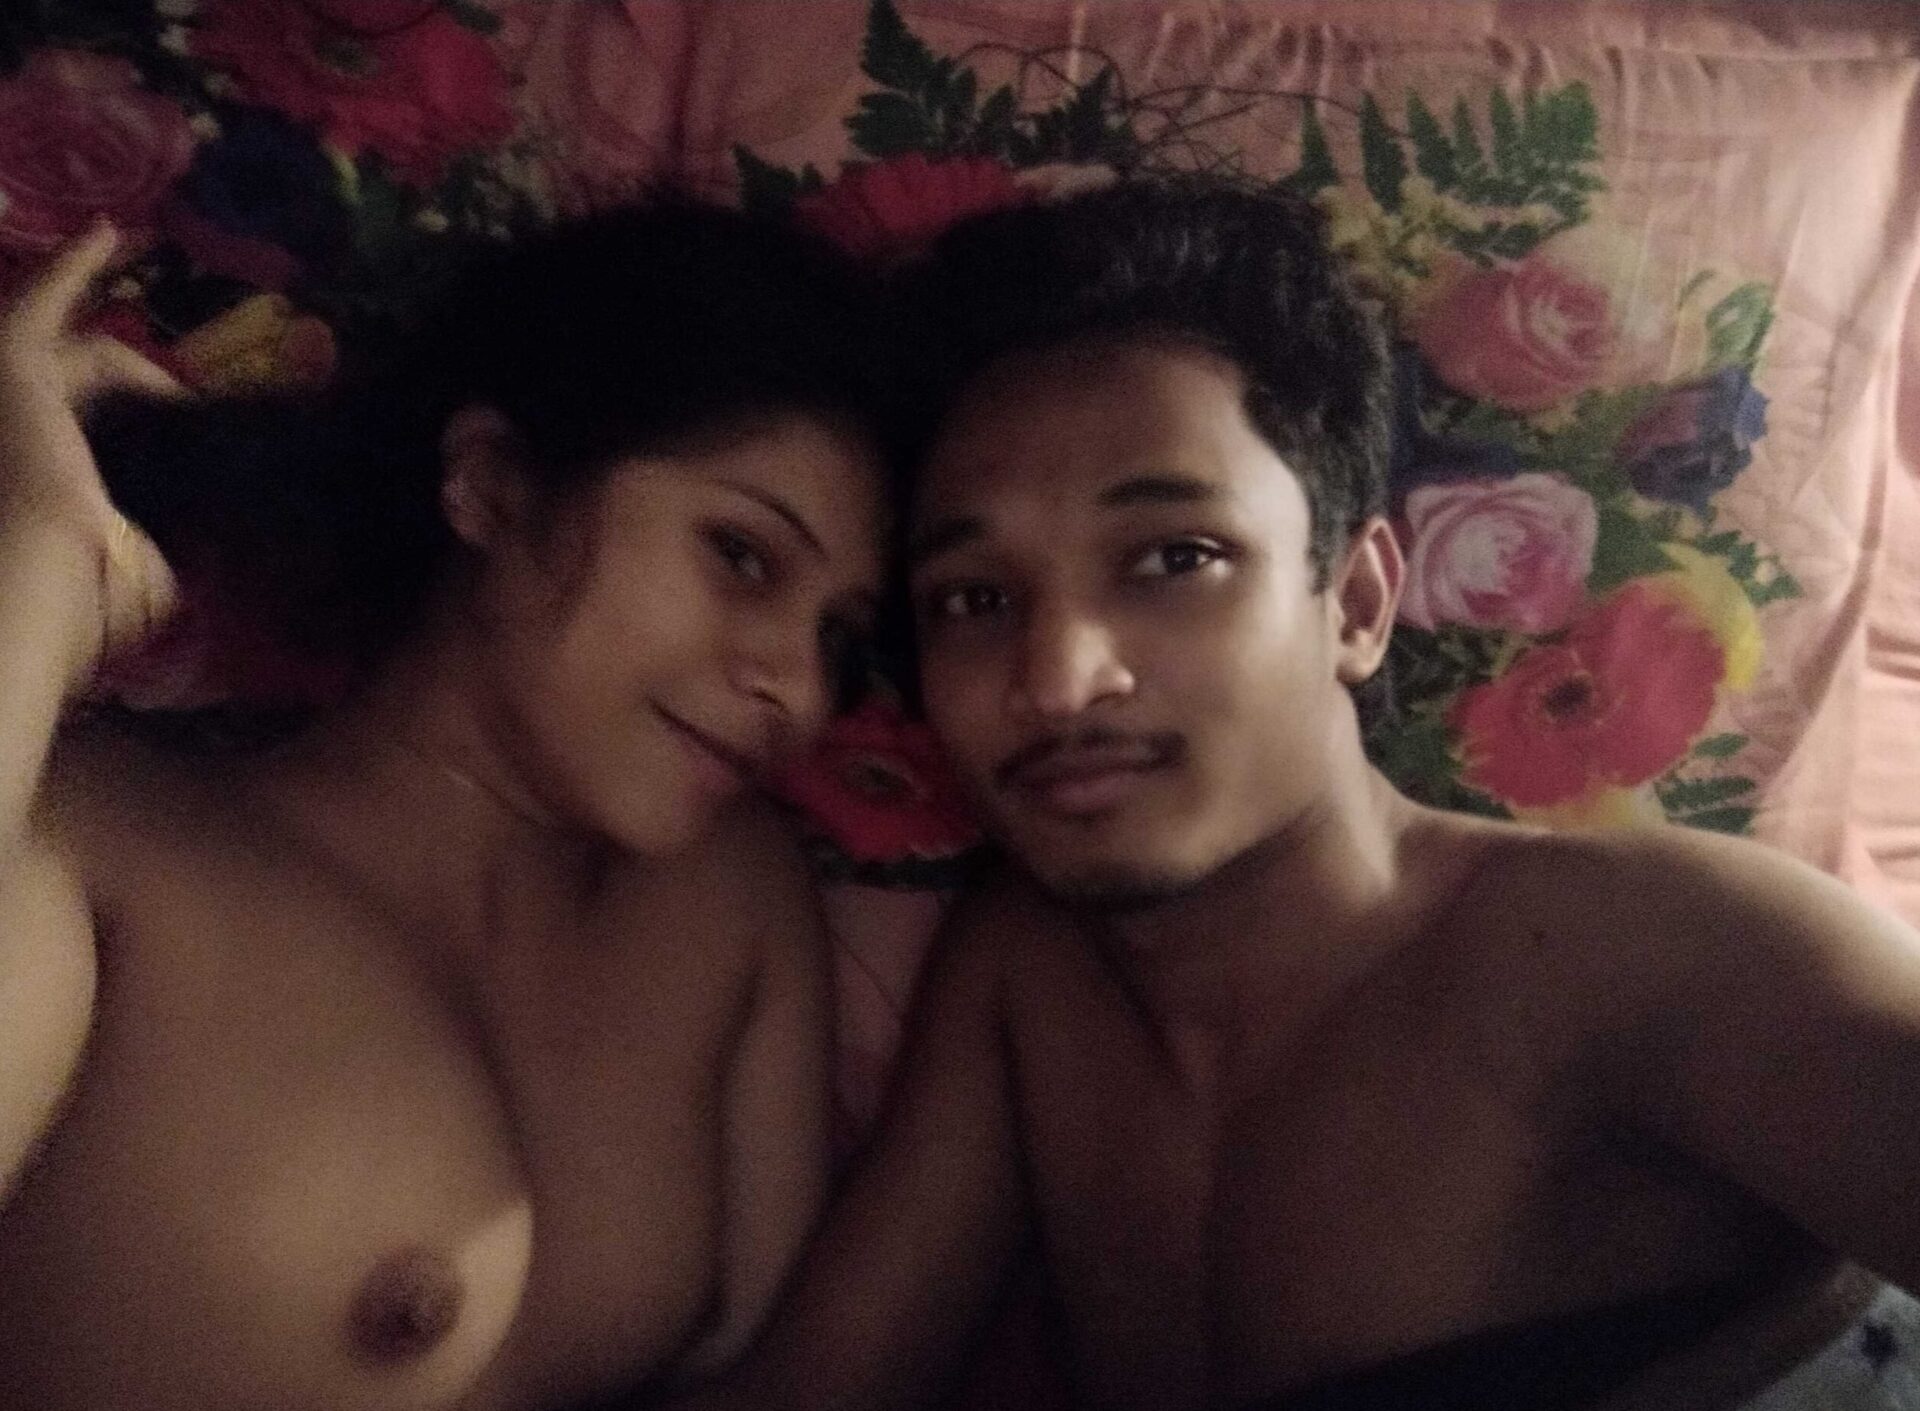 Newly married couple first night romance photos picture